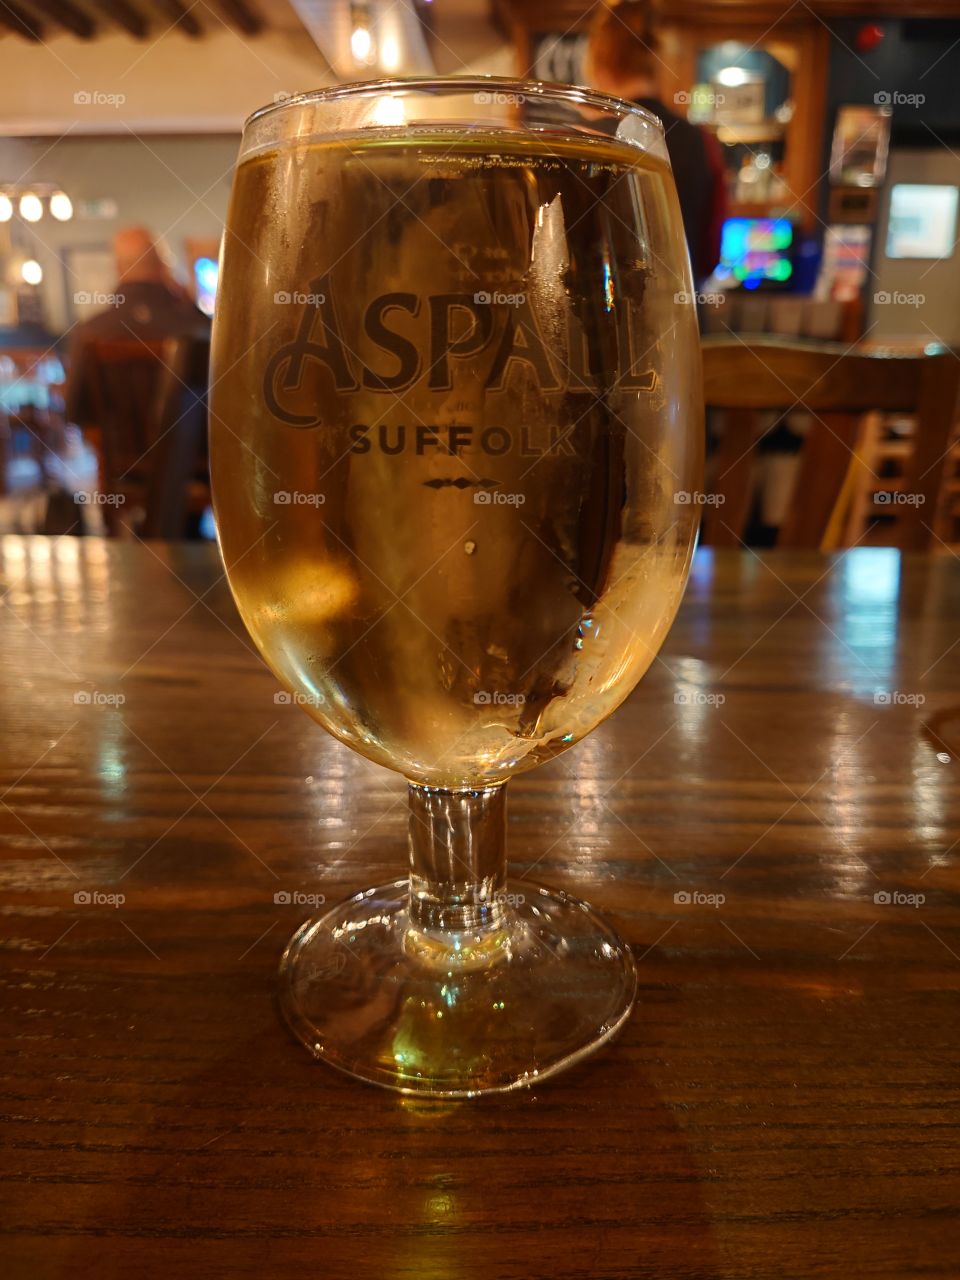 Cold pint of Cider